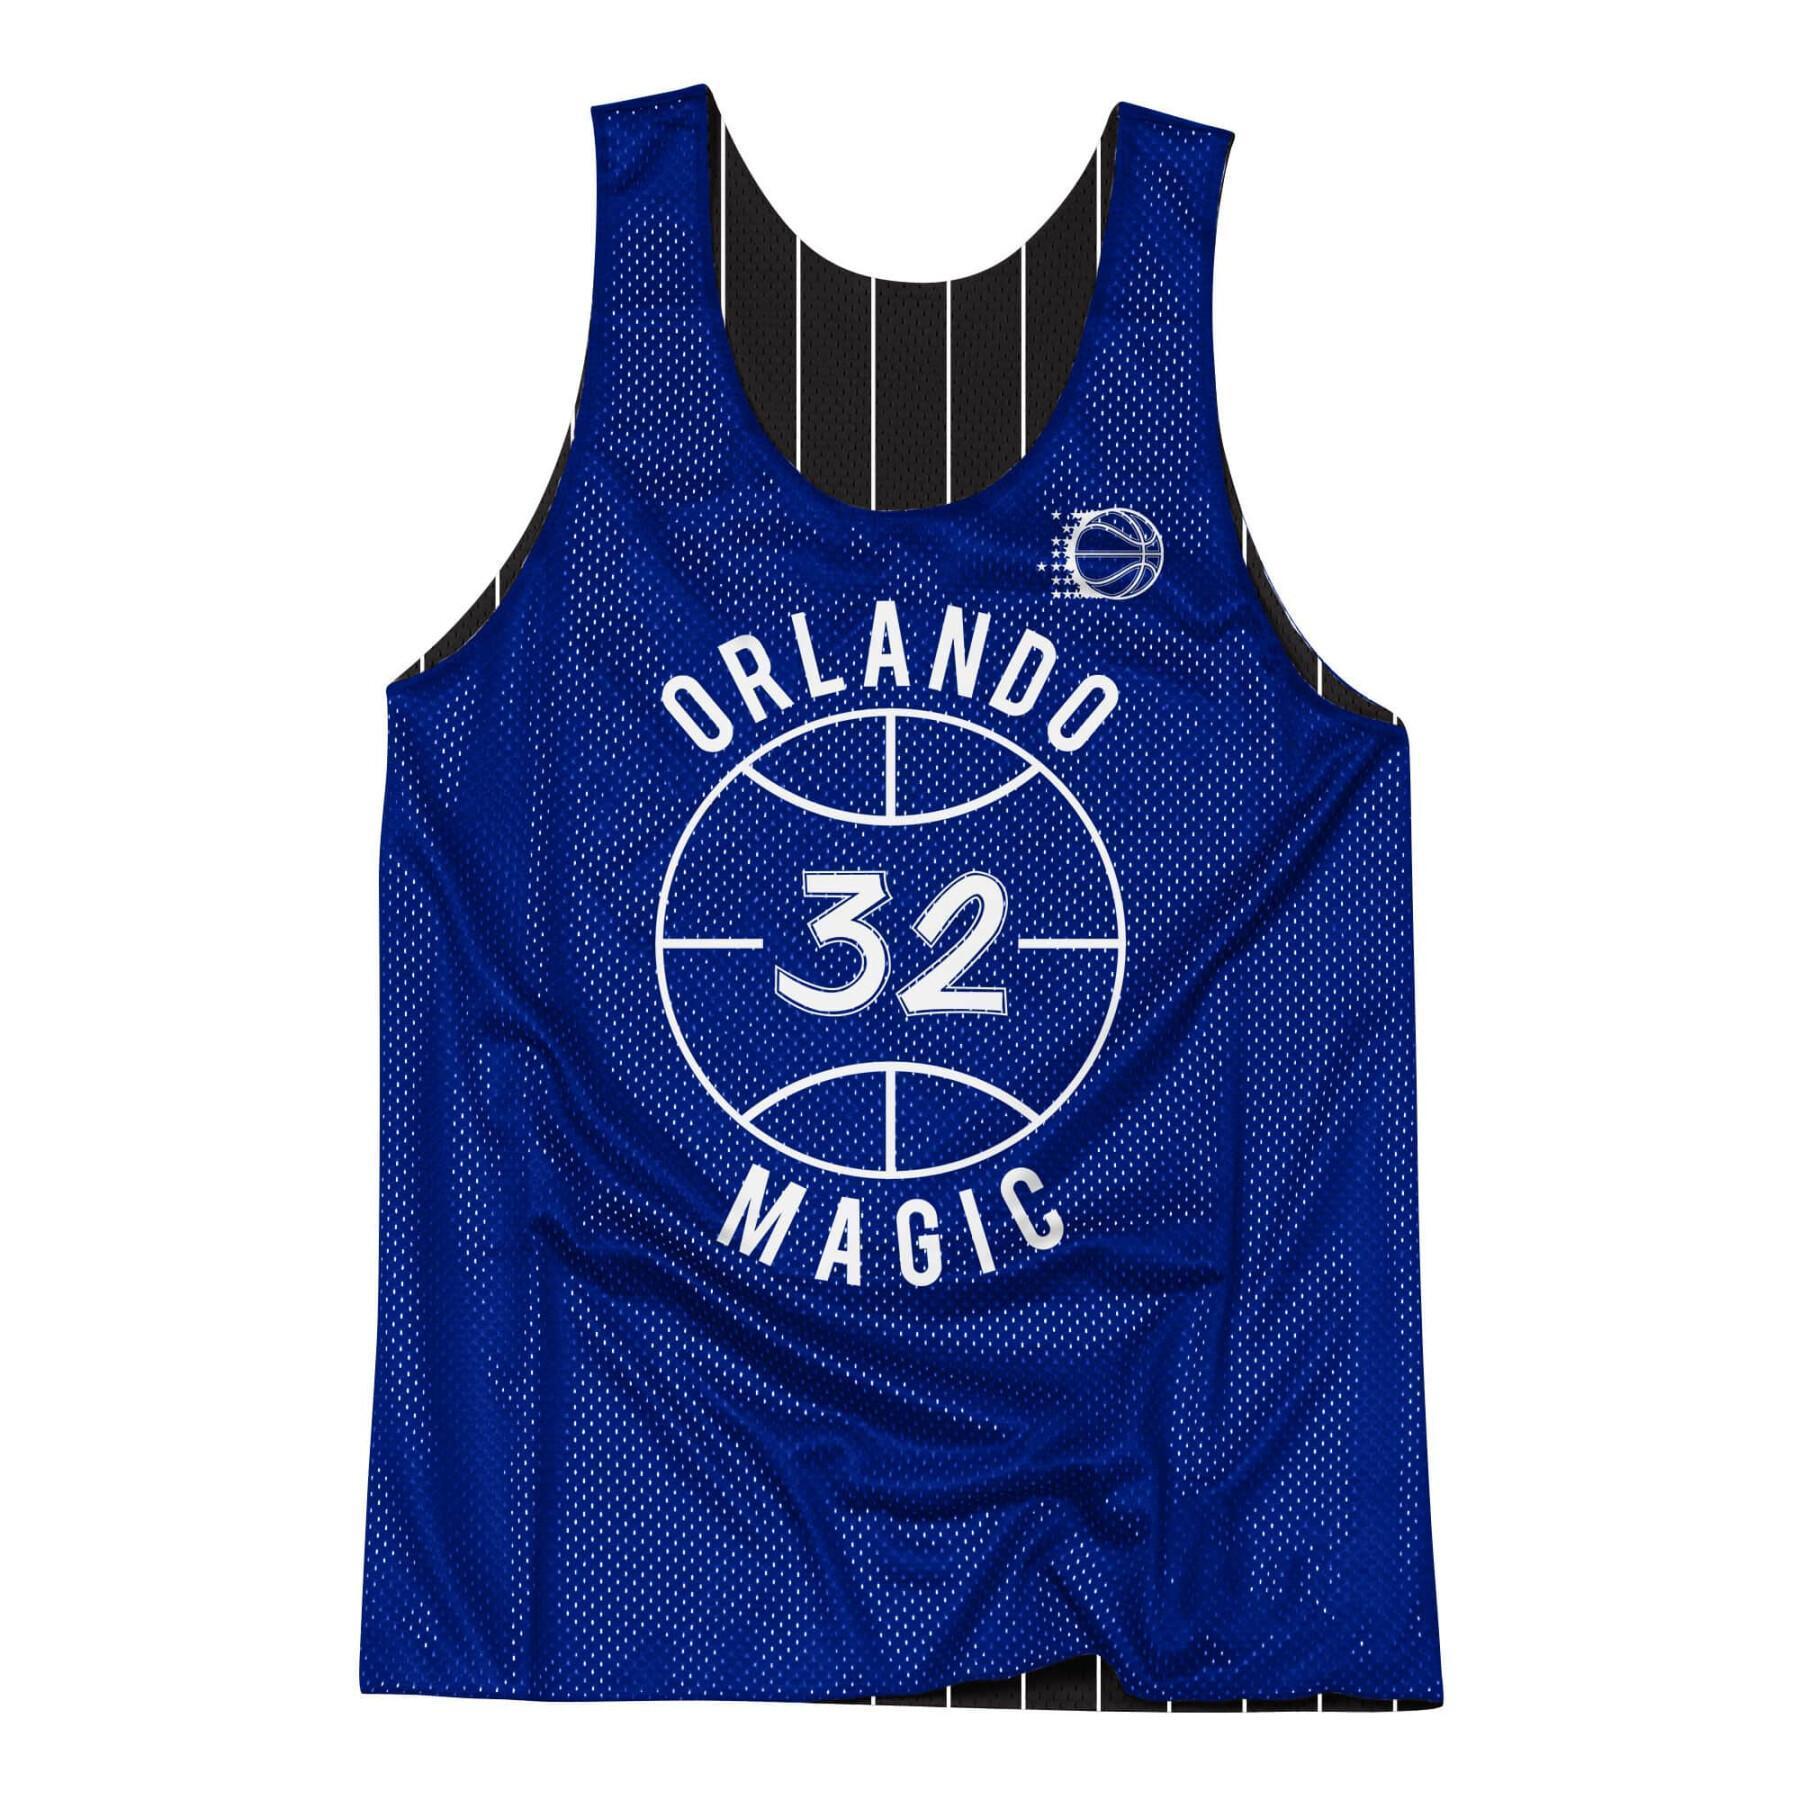 Reversible jersey Orlando Magic Shaquille O'Neal